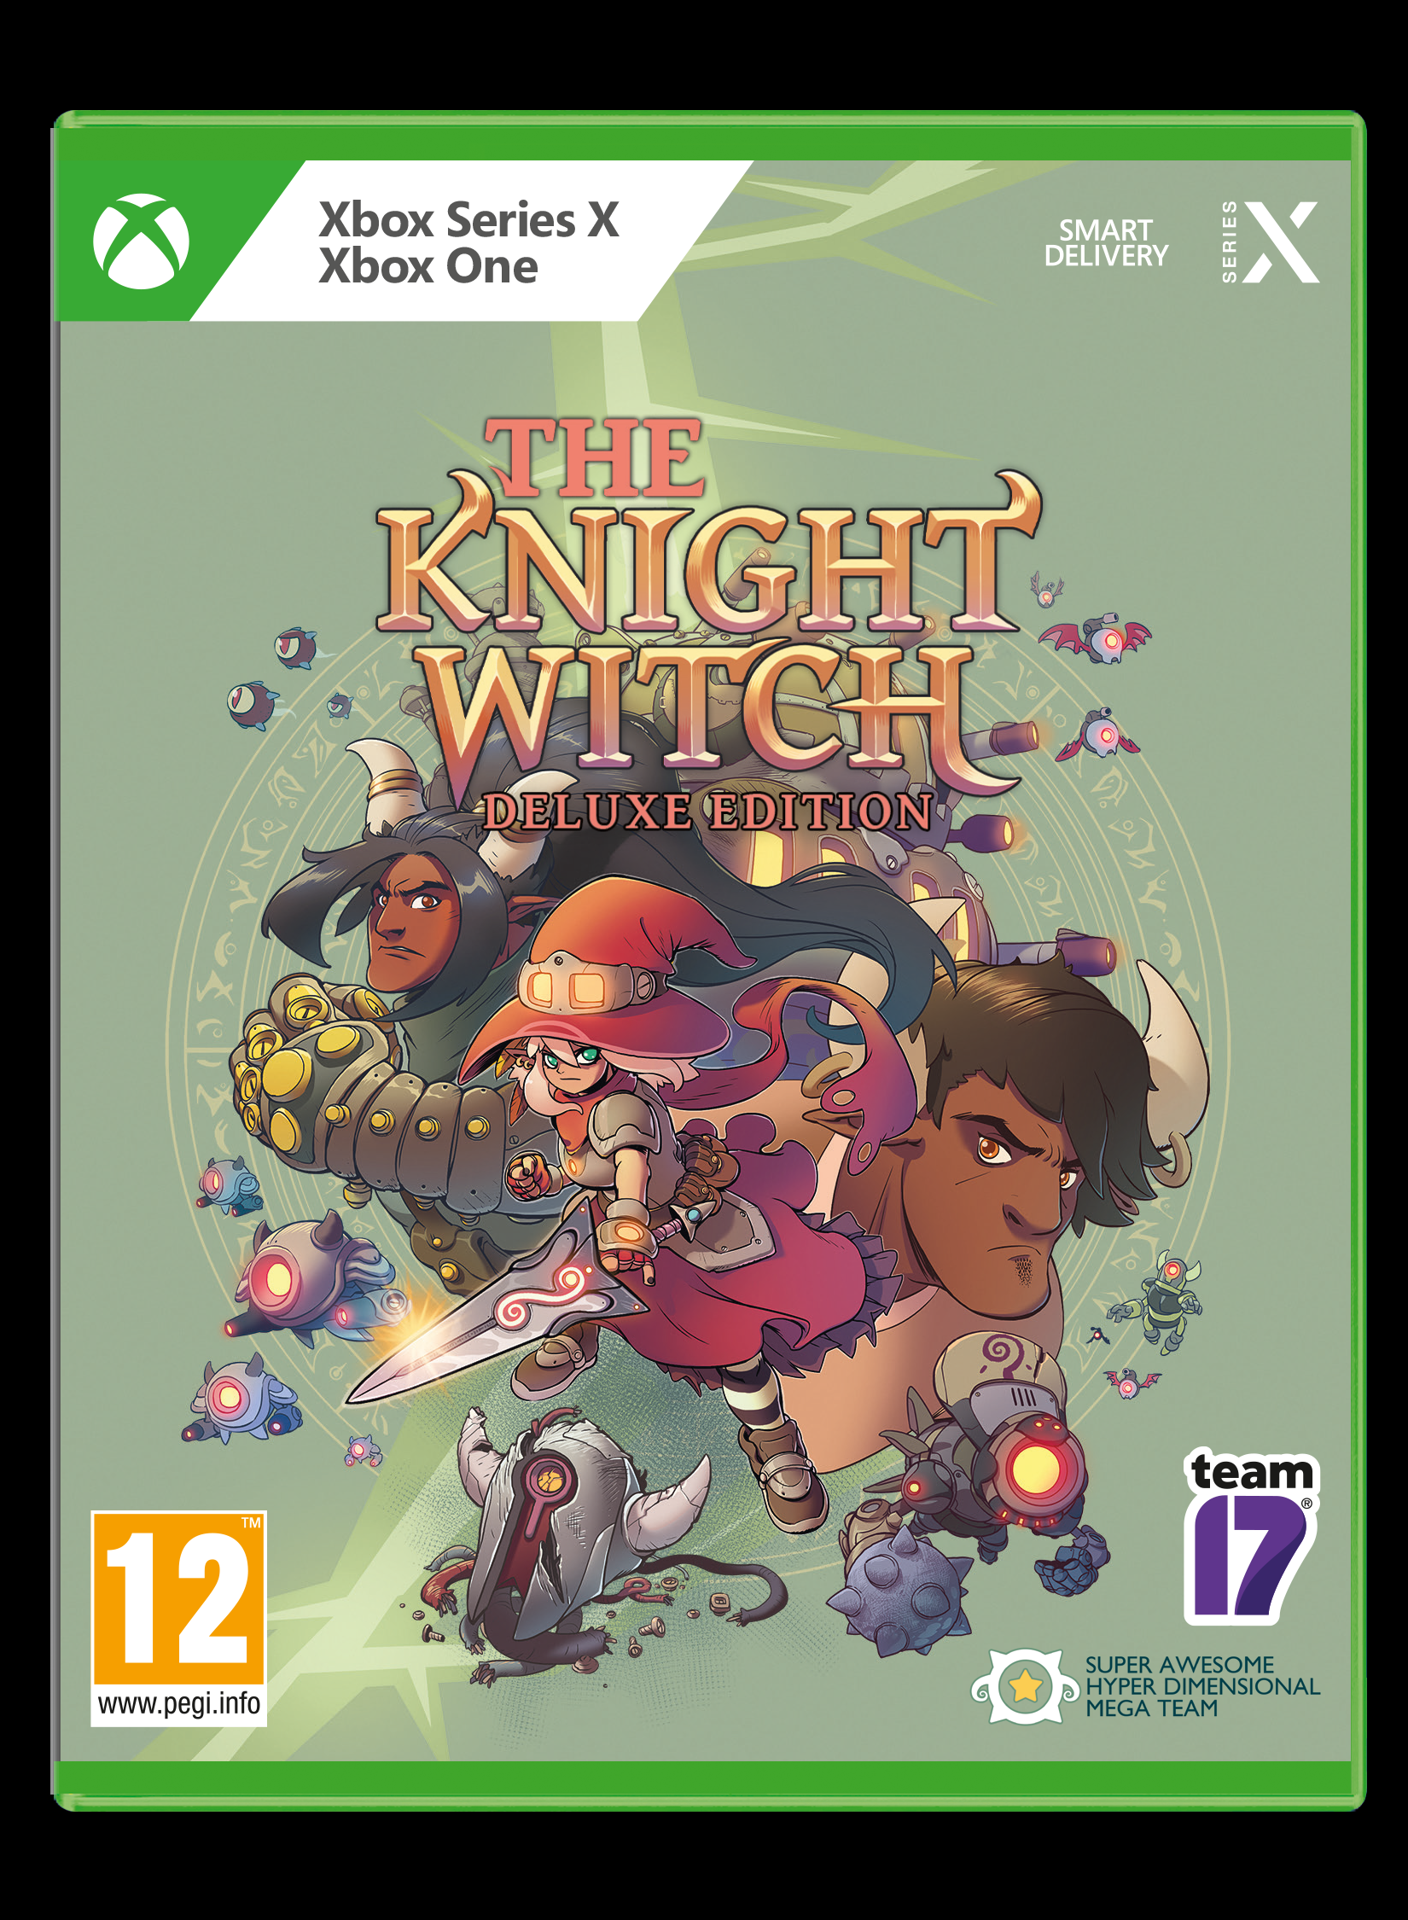 The Knight Witch - Deluxe Edition